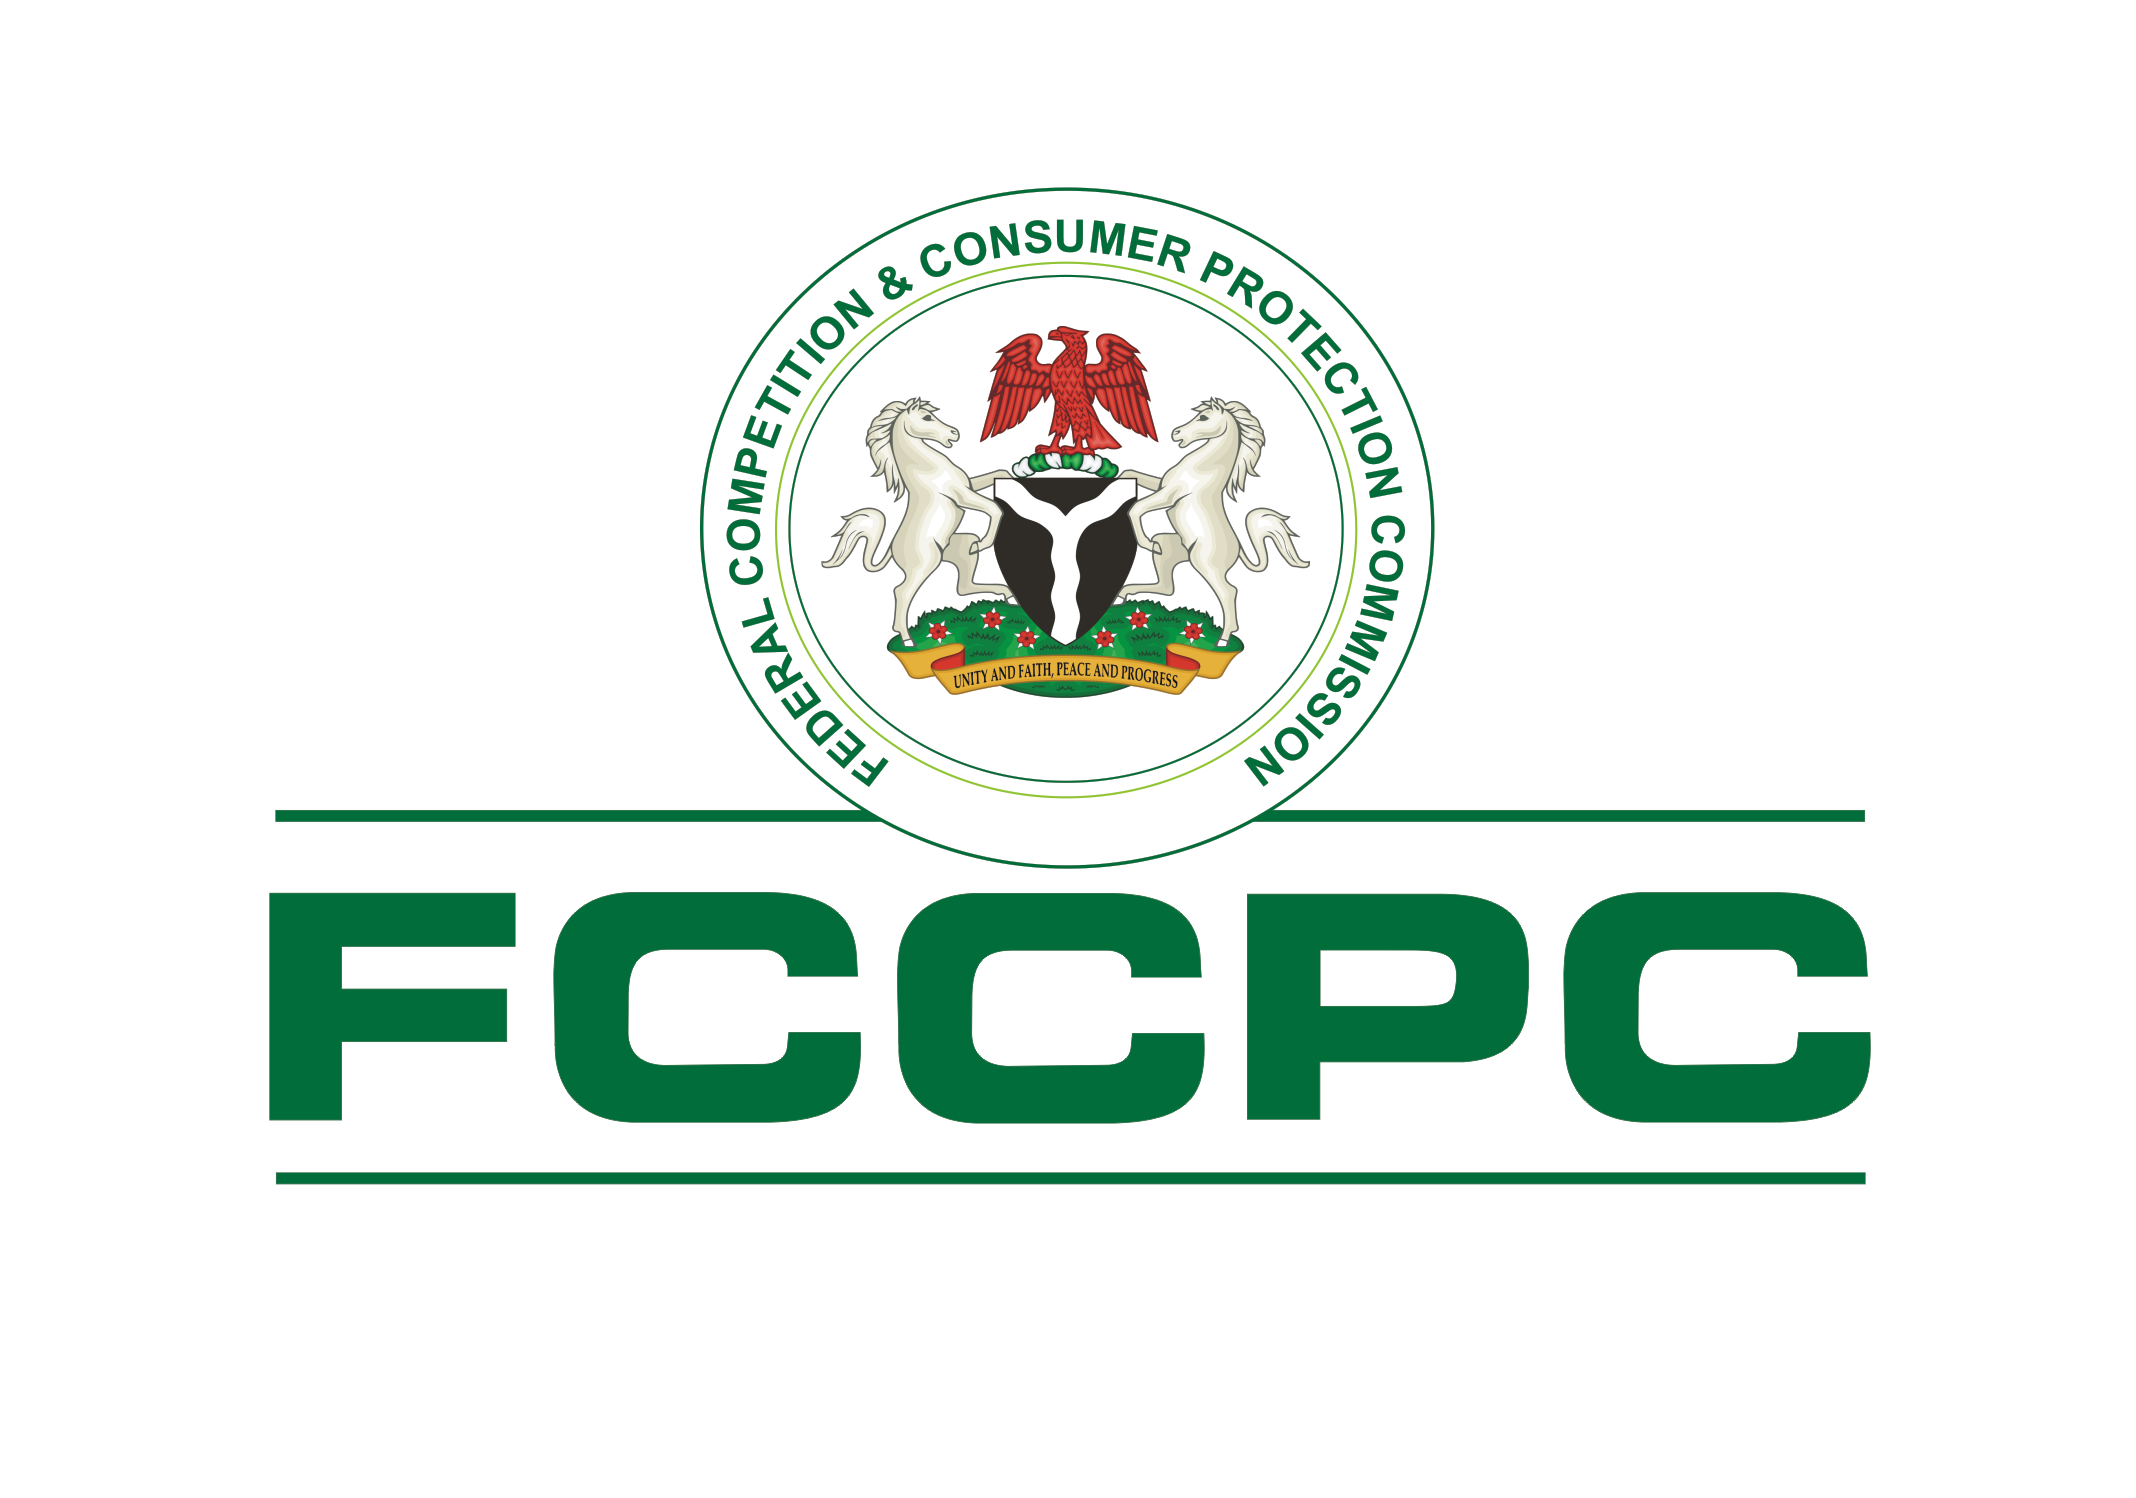 FCCPC Condemns Customer Discrimination, Gender, Social class Stereotypes